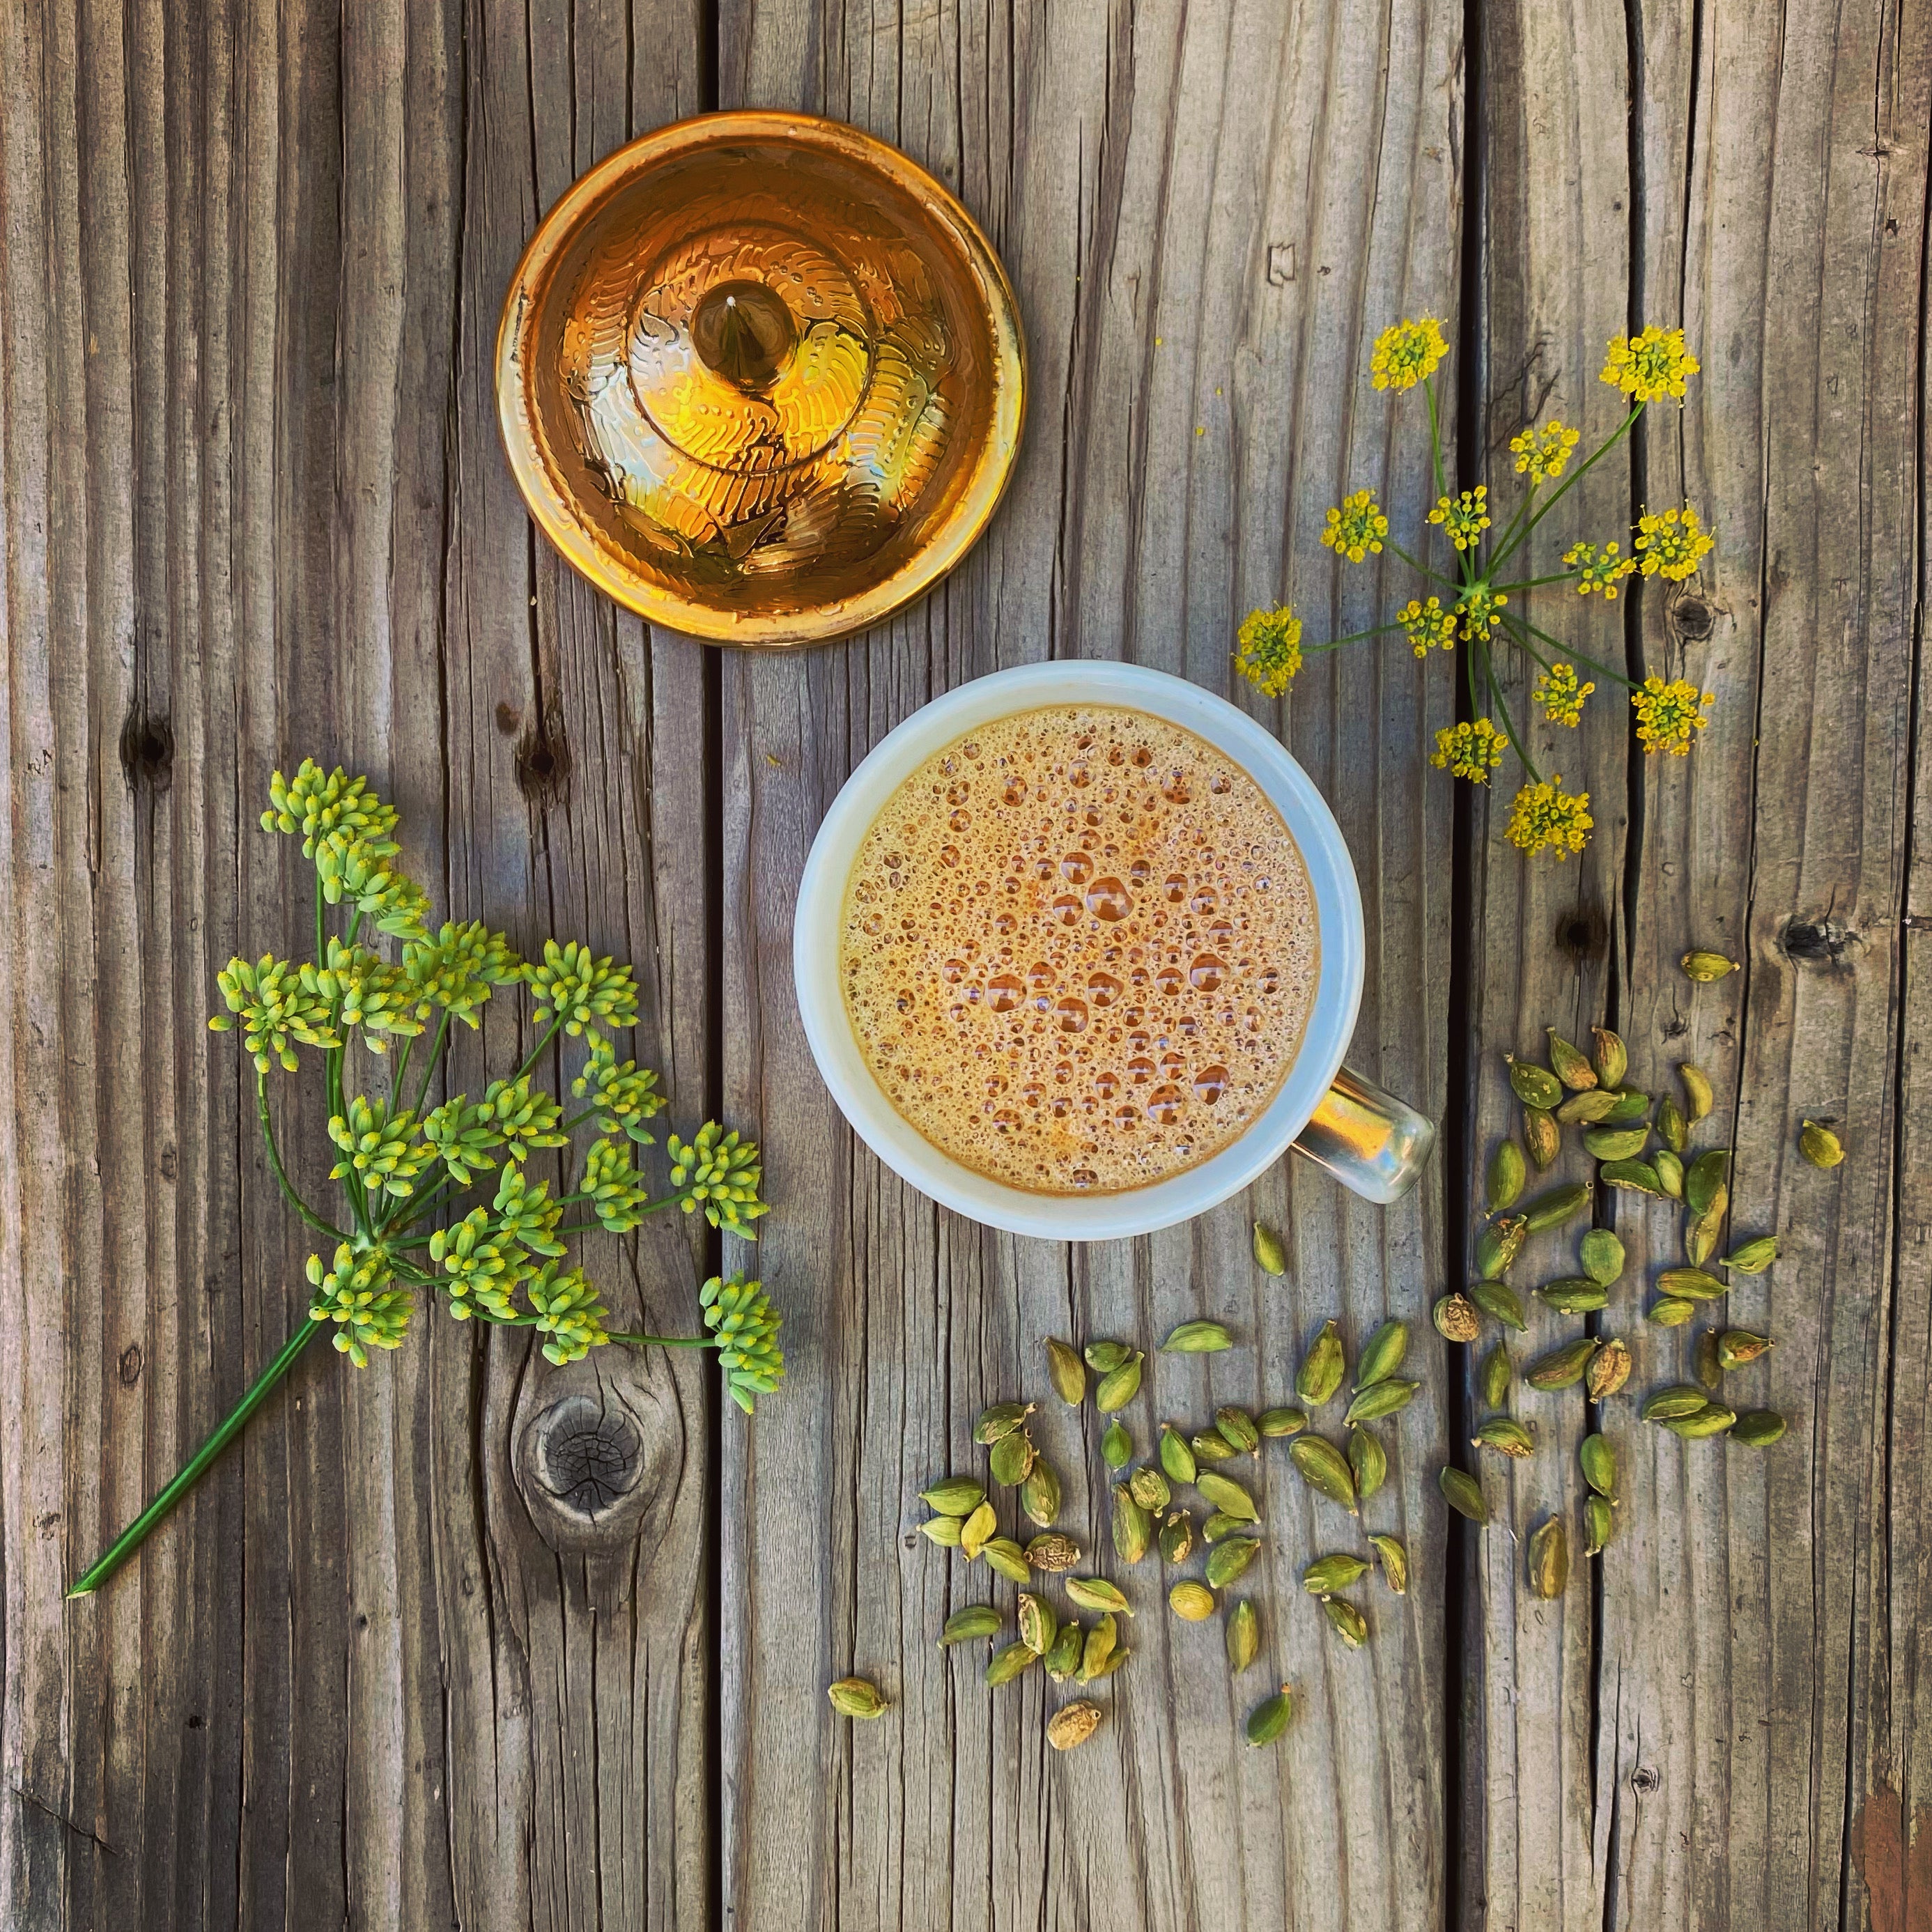 Cup of Honey Masala Chai with whole green cardamom pods and fennel blossoms on a wooden background